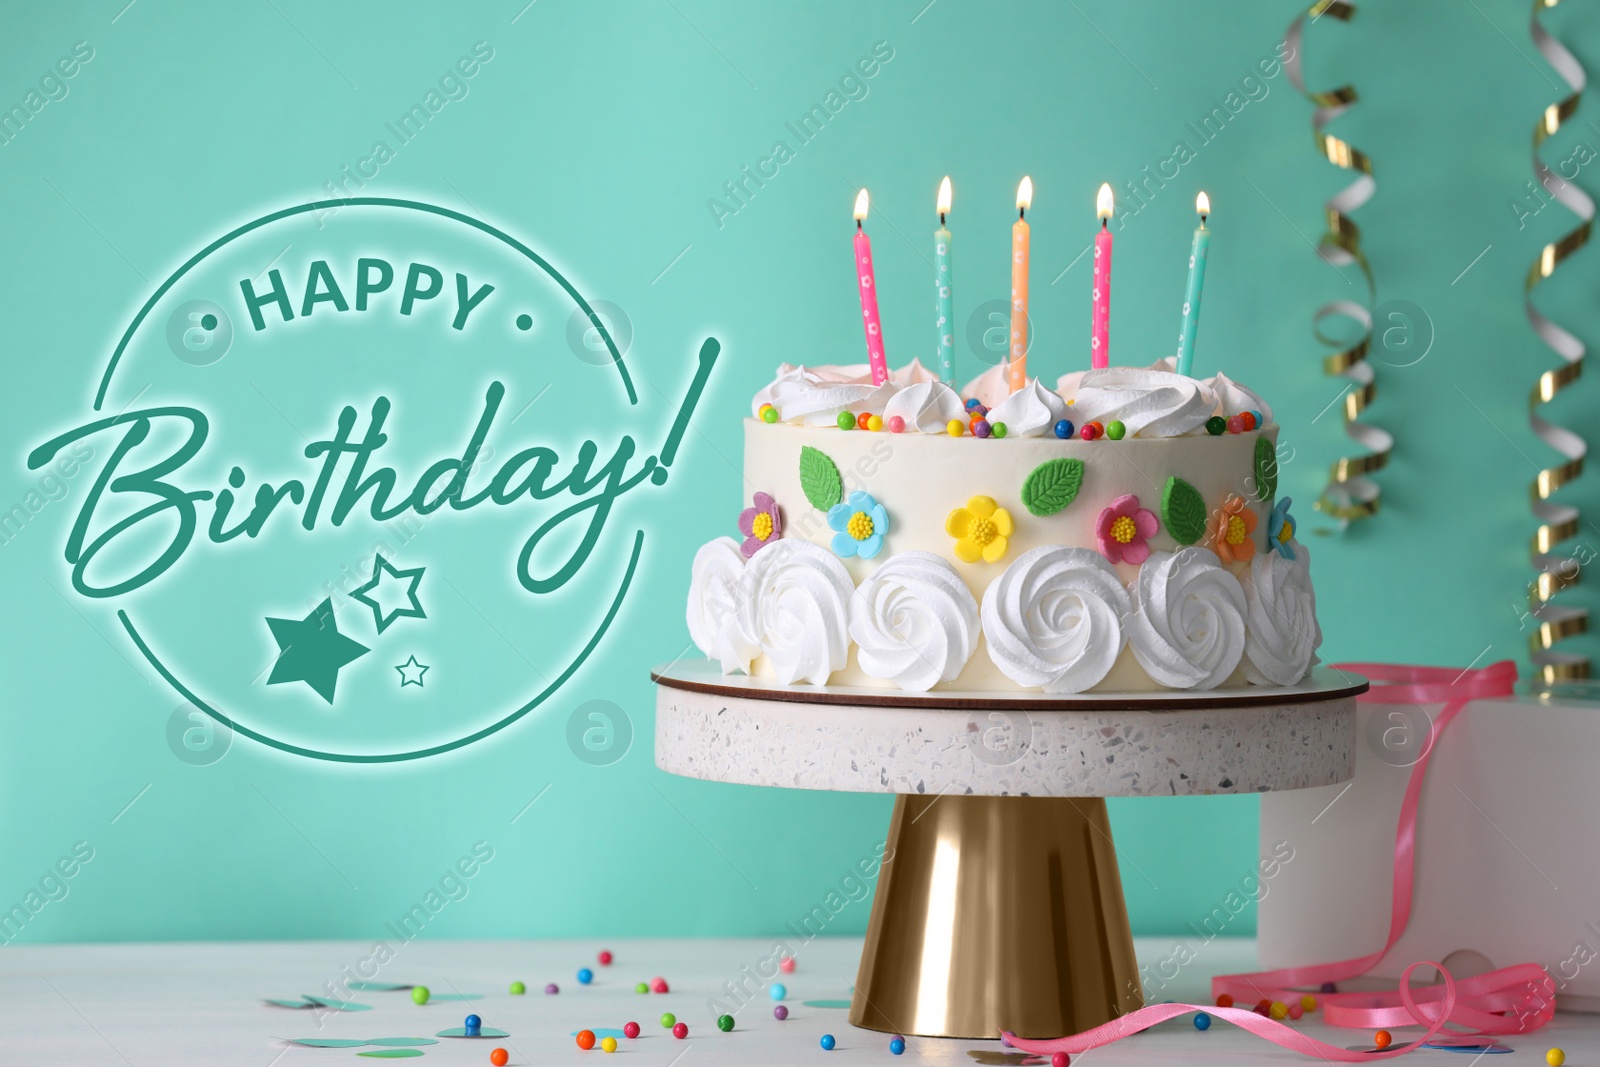 Image of Happy Birthday! Delicious cake and party decor on white wooden table against turquoise background